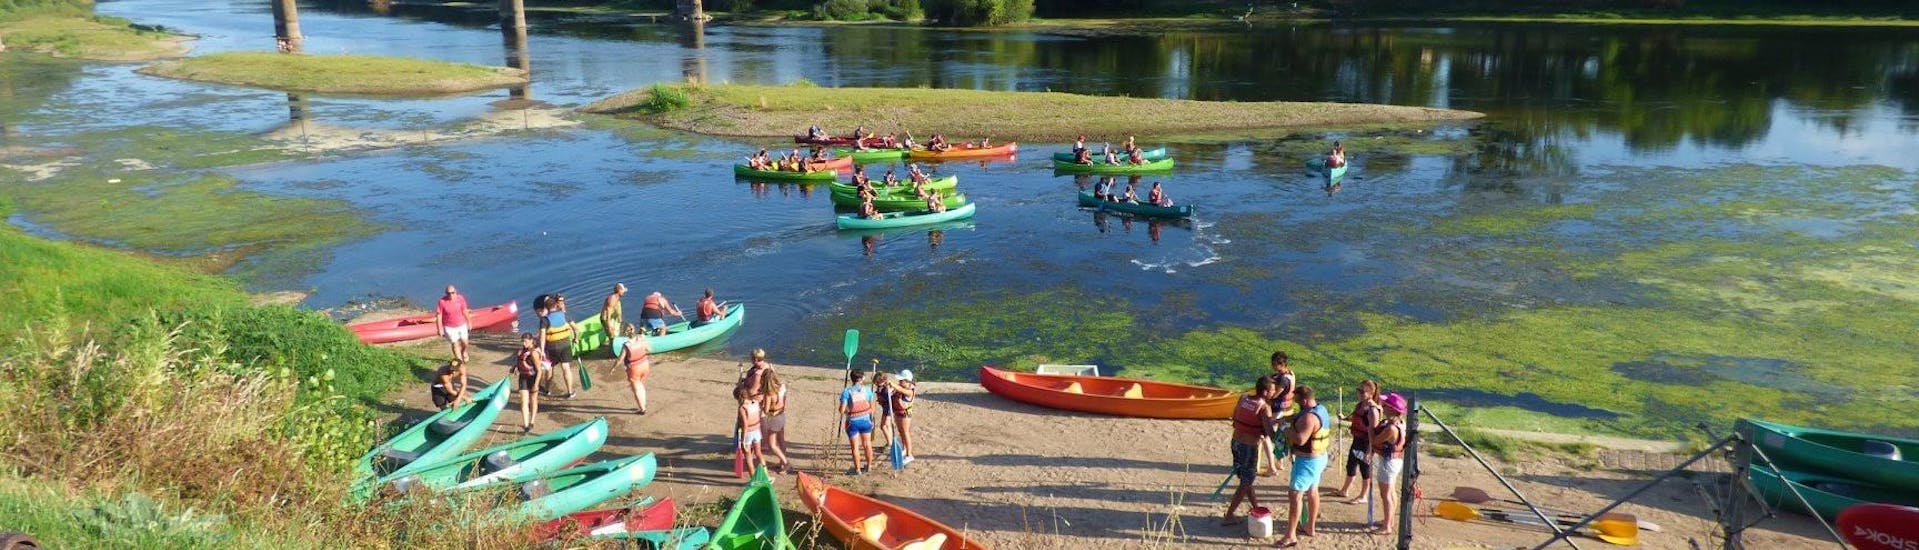 Holidaymakers are getting into the water for their Full Day 17km Canoe Rental on the Dordogne with Canoe Kayak Port-Sainte-Foy.